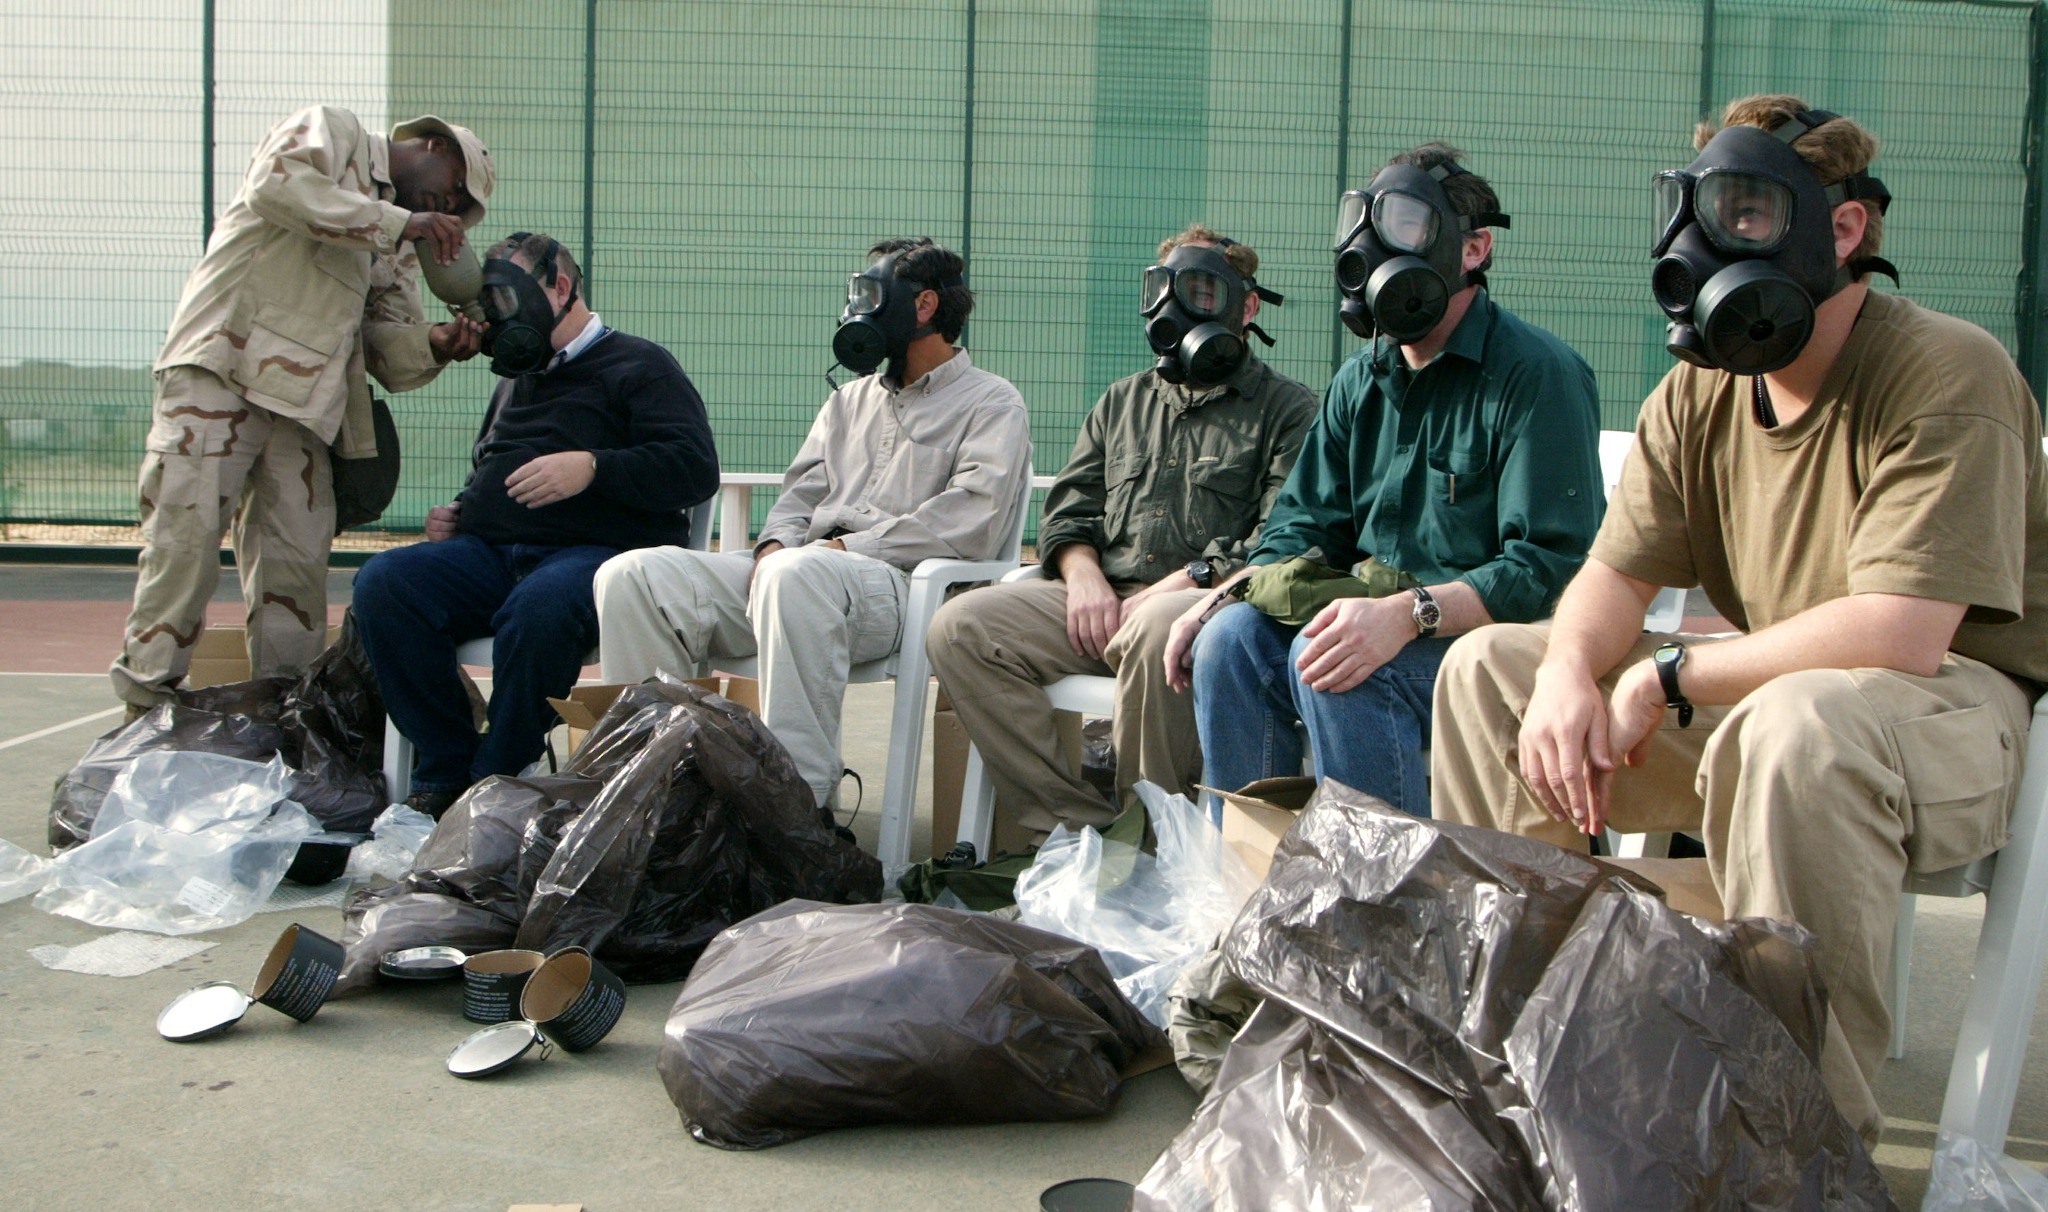 A soldier fits Western journalists with gas masks before the 2003 invasion of Iraq. More than 600 journalists were embedded in military units. (Photo: Joe Raedle / Getty)